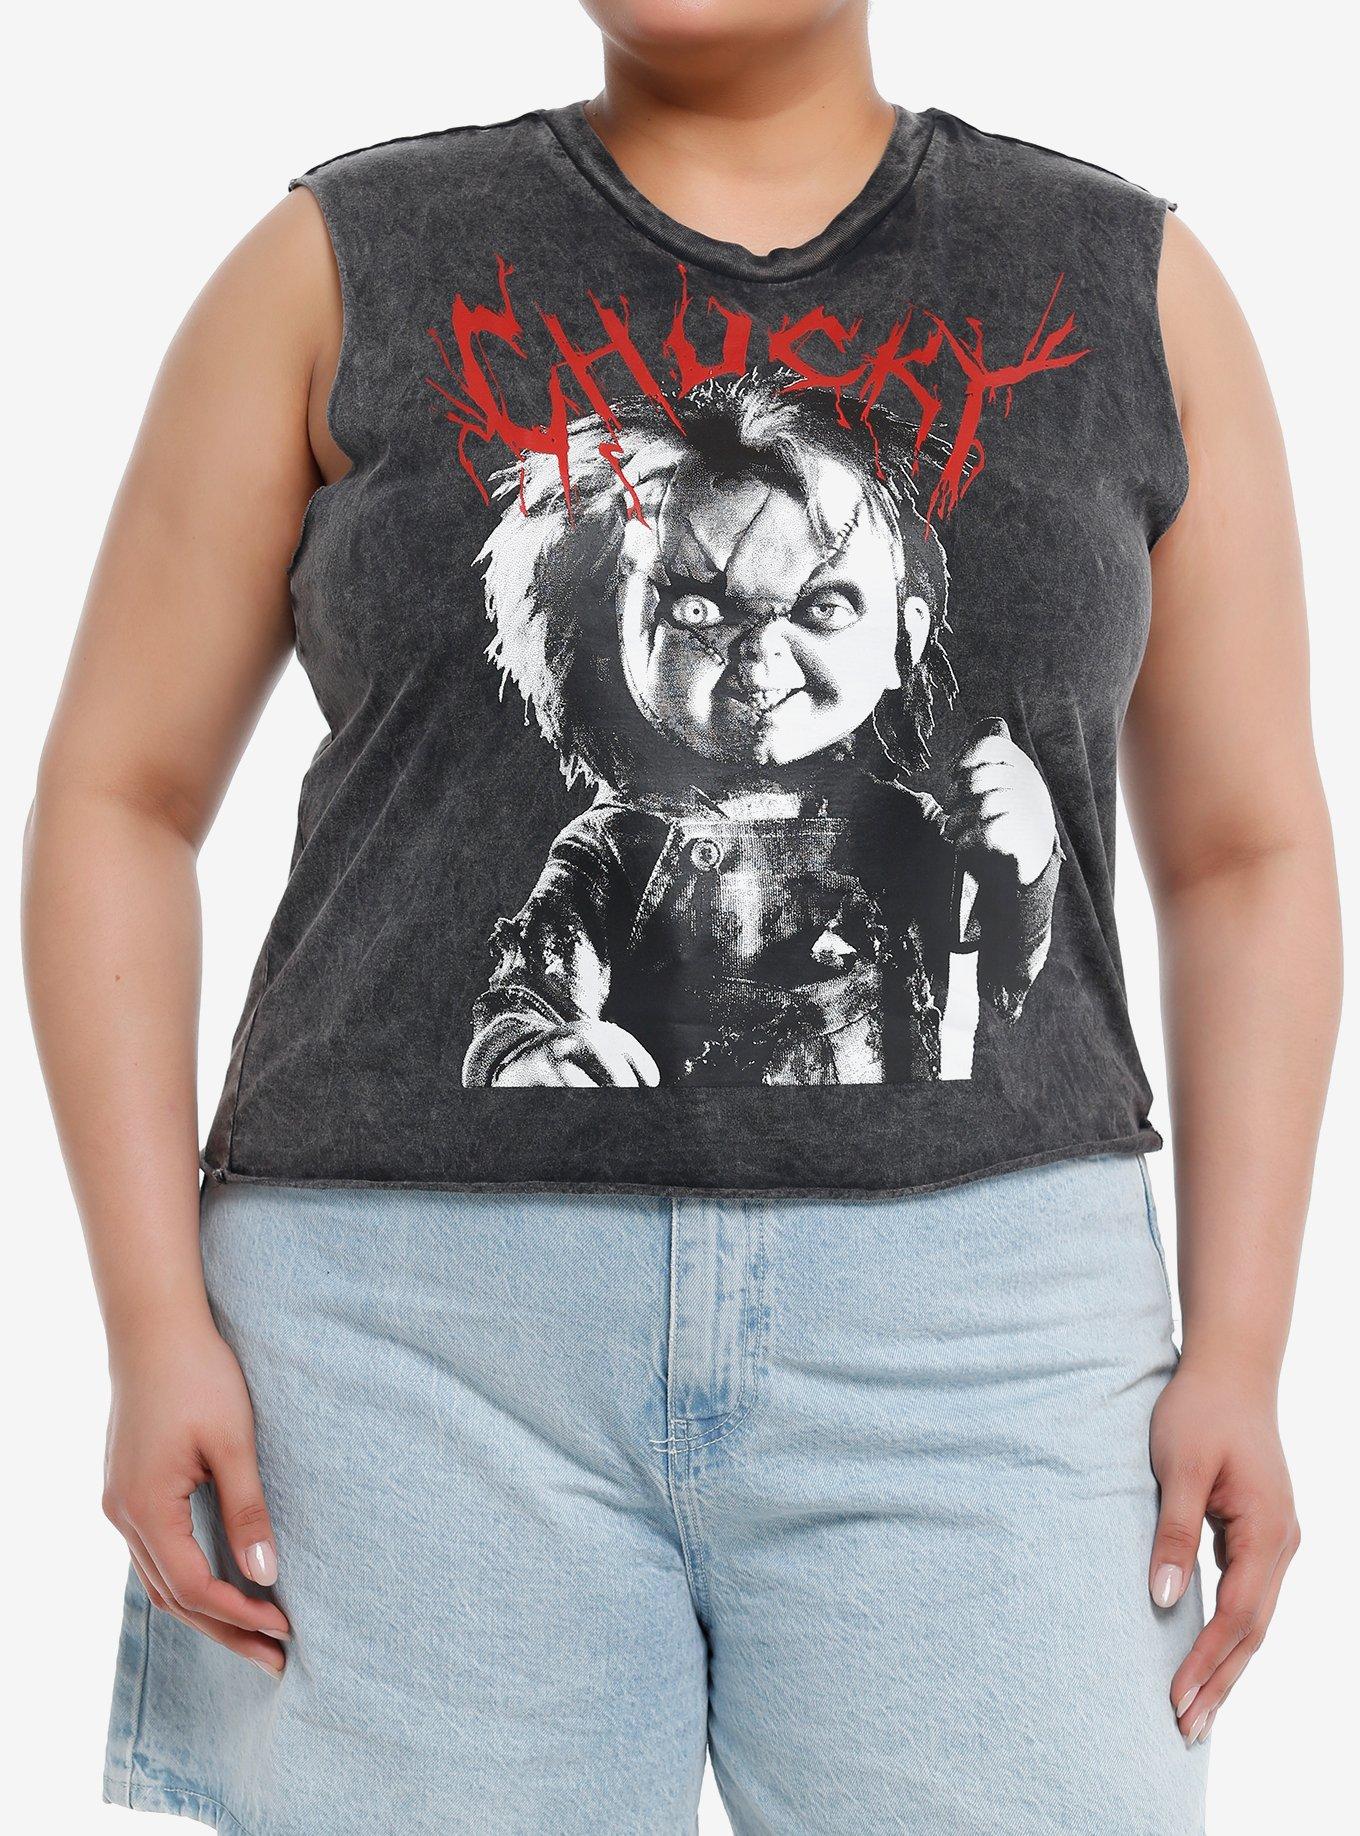 Chucky Jumbo Graphic Girls Muscle Tank Top Plus Size, MULTI, hi-res